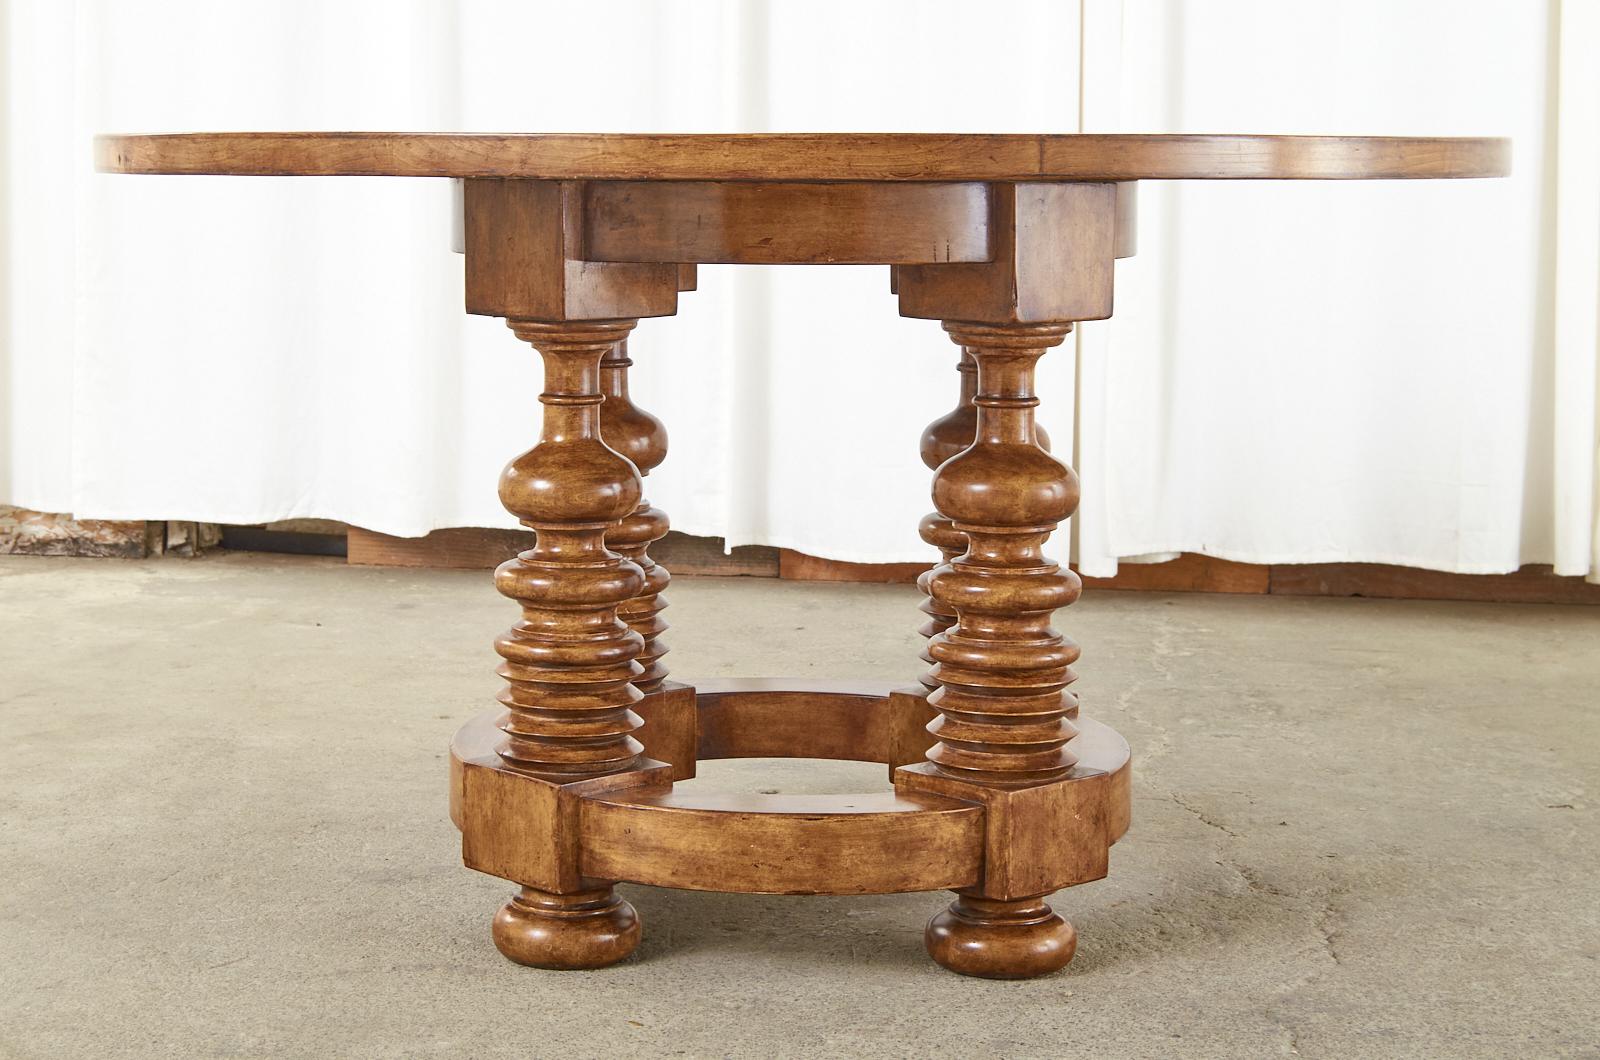 Hand-Crafted Portuguese Baroque Style Round Dining Room or Center Table